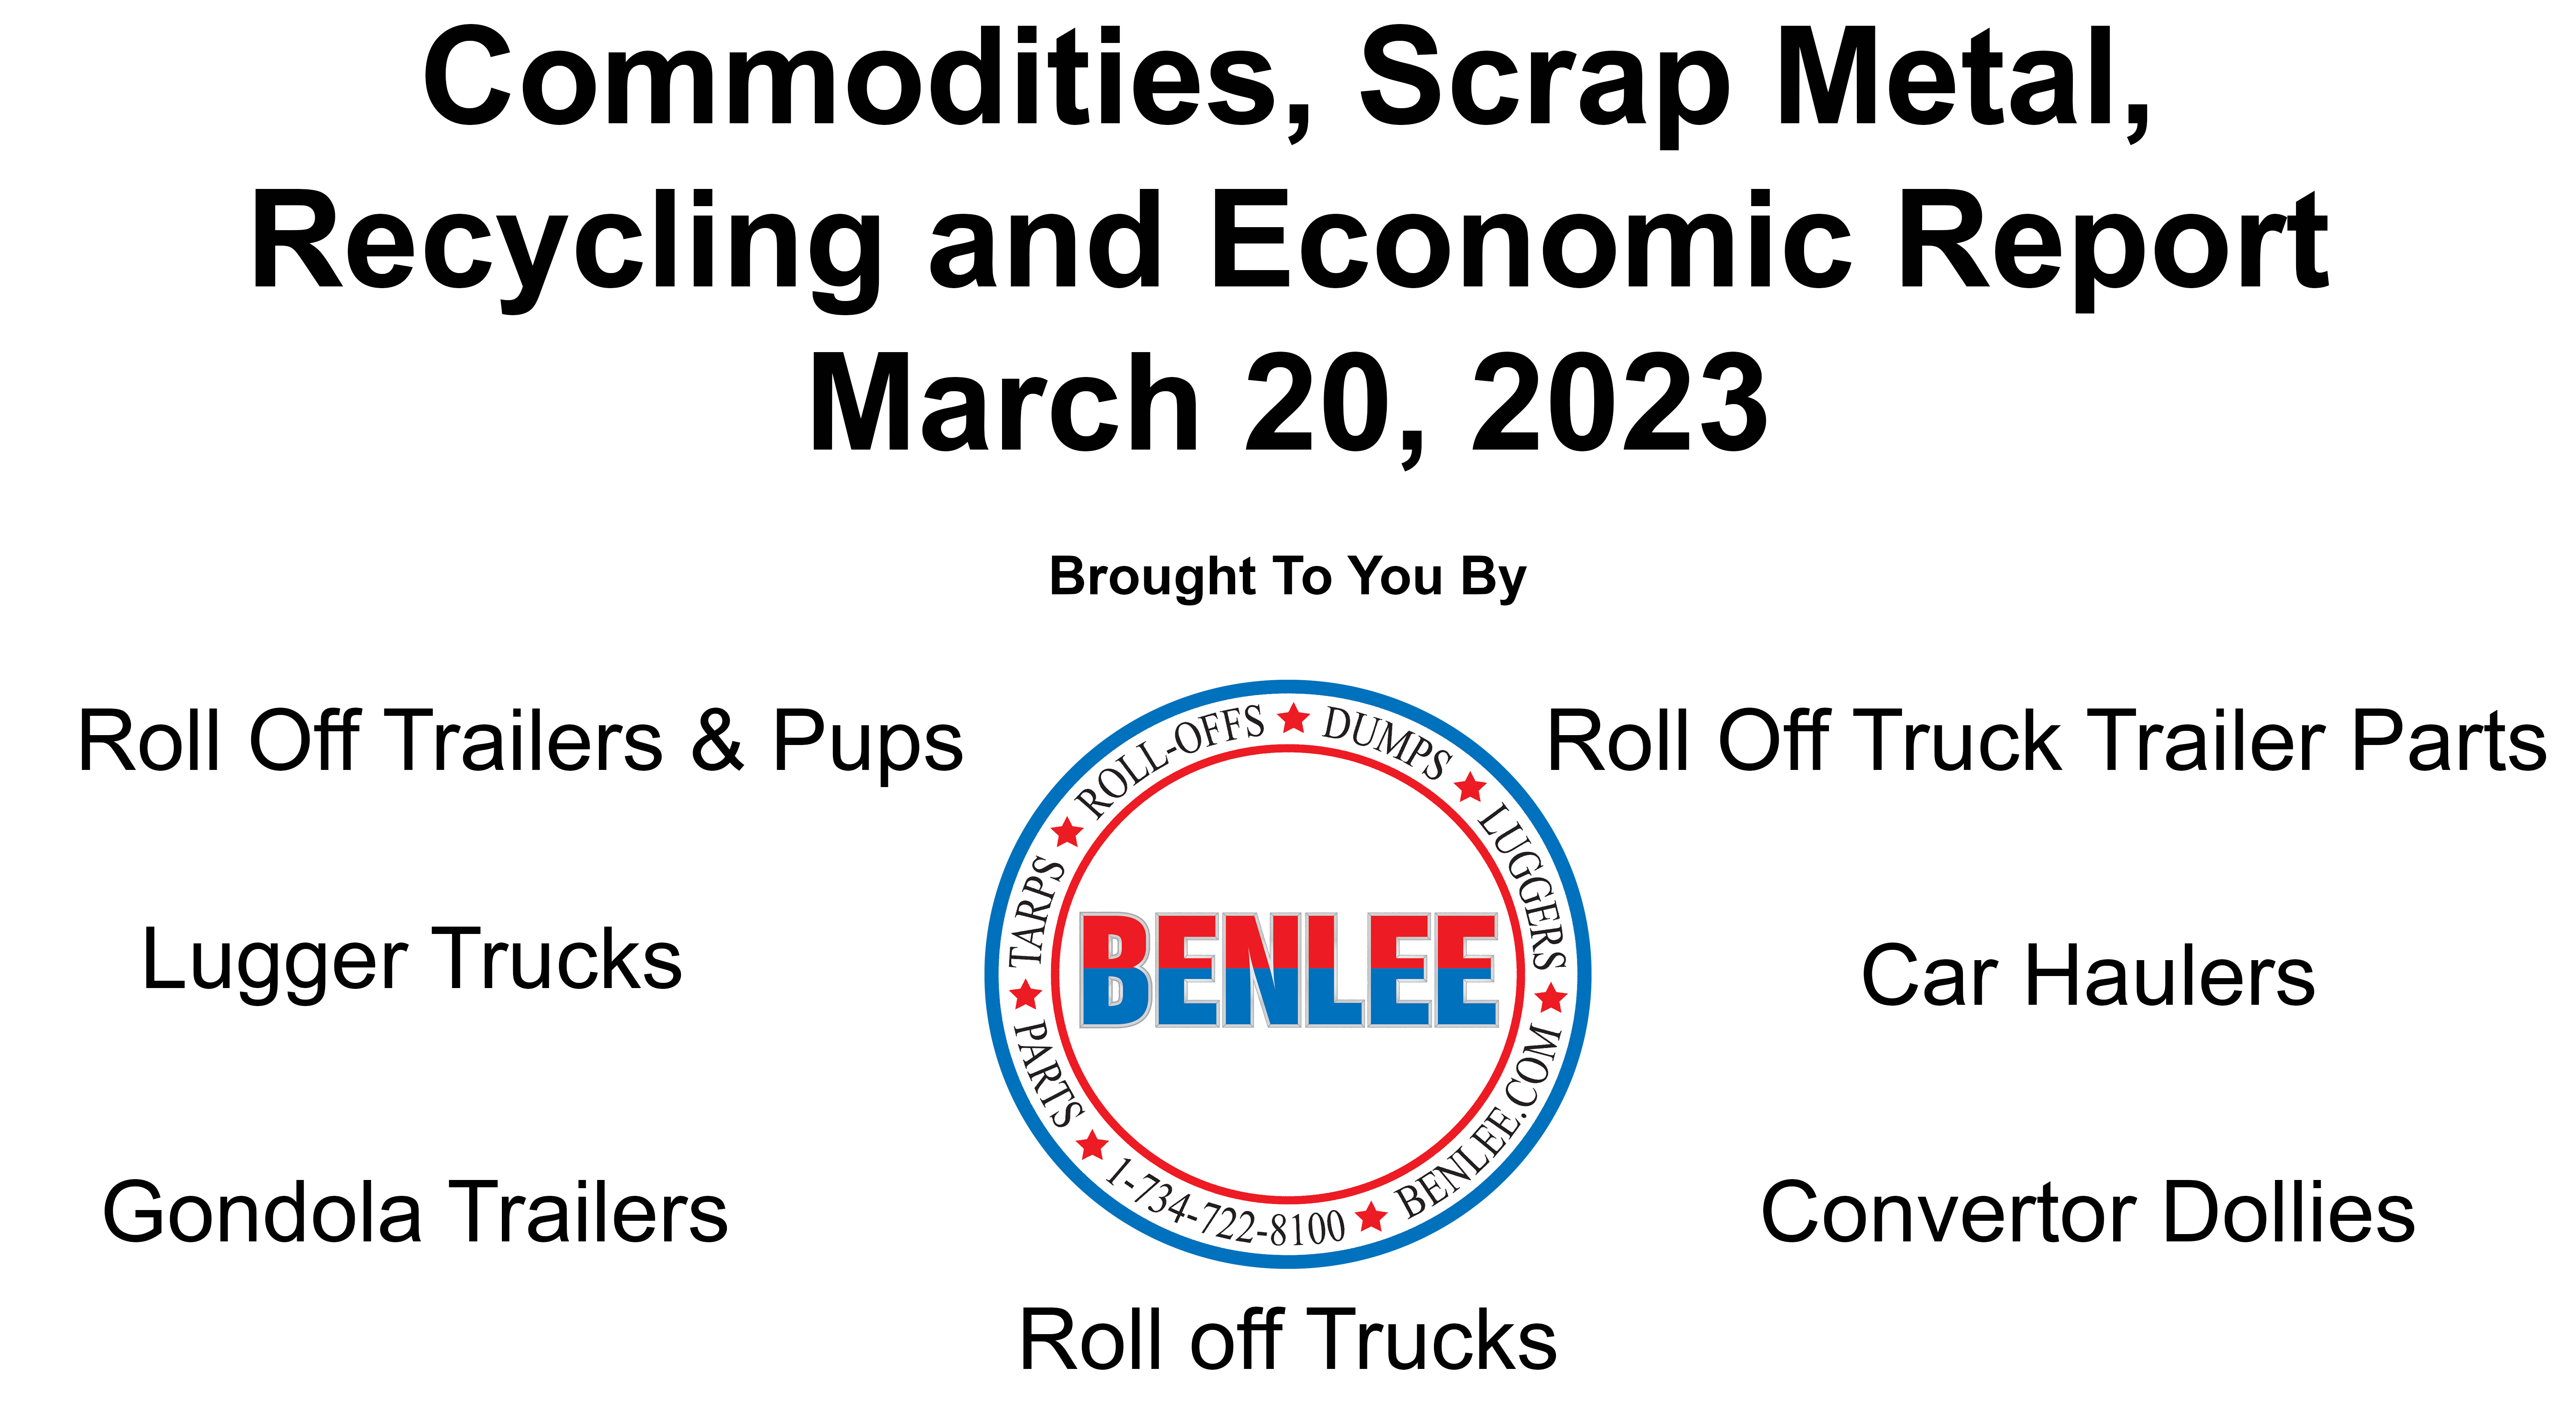 Commodities, Scrap Metal, Recycling and Economic Report